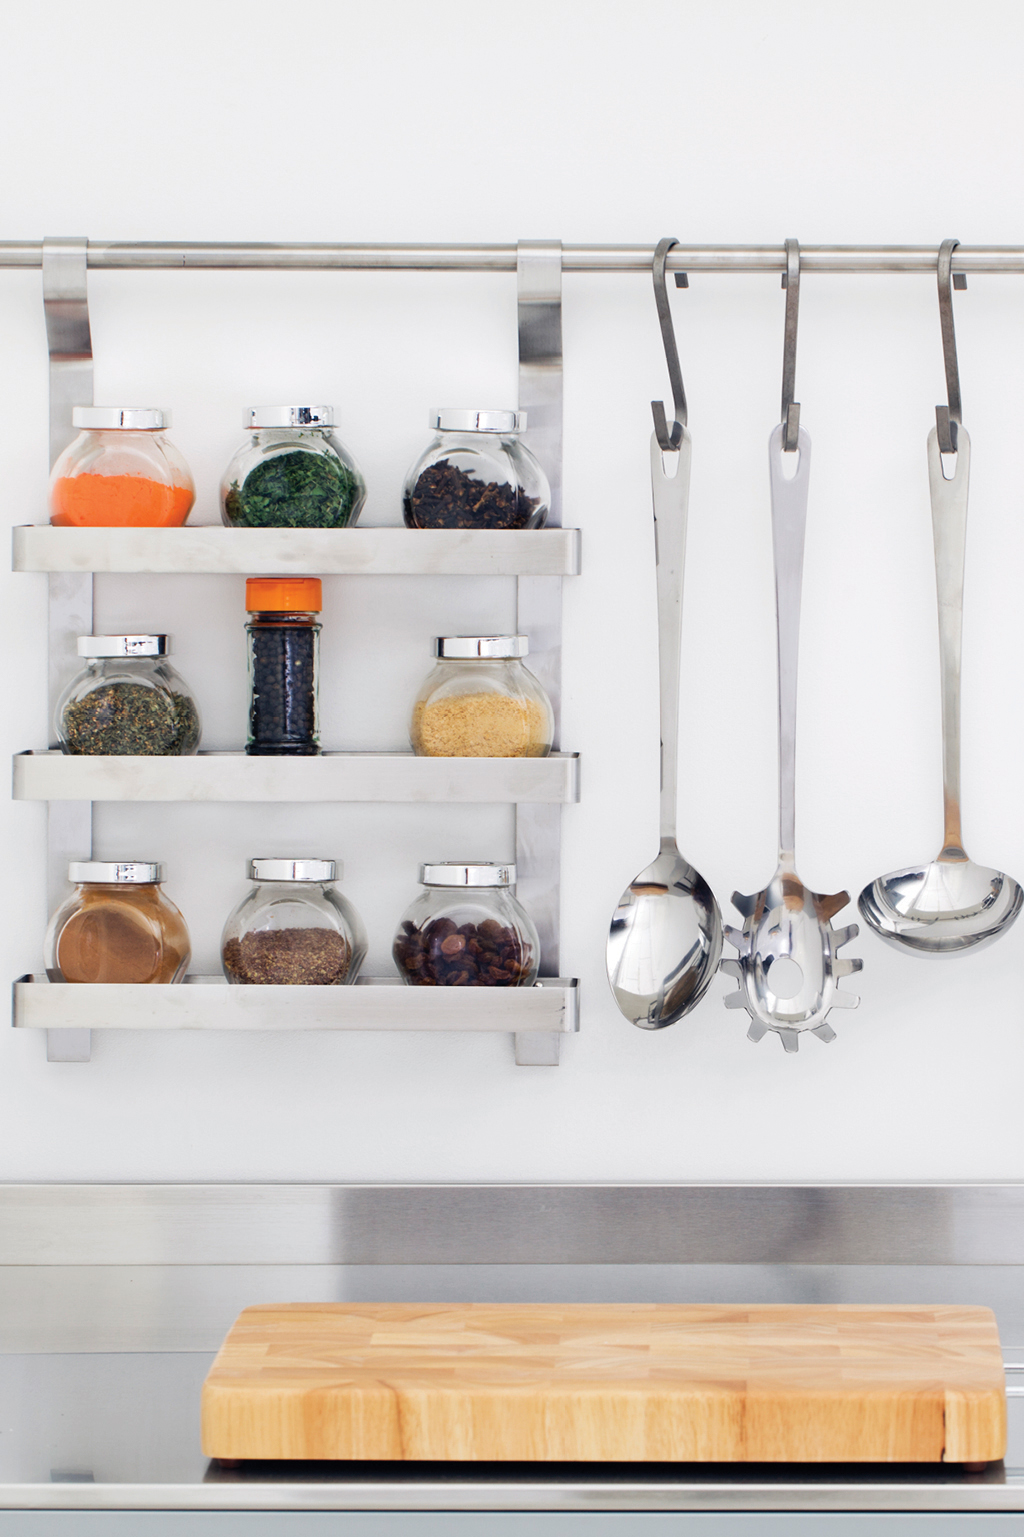 Kitchen utensils and spice rack hanging above sink